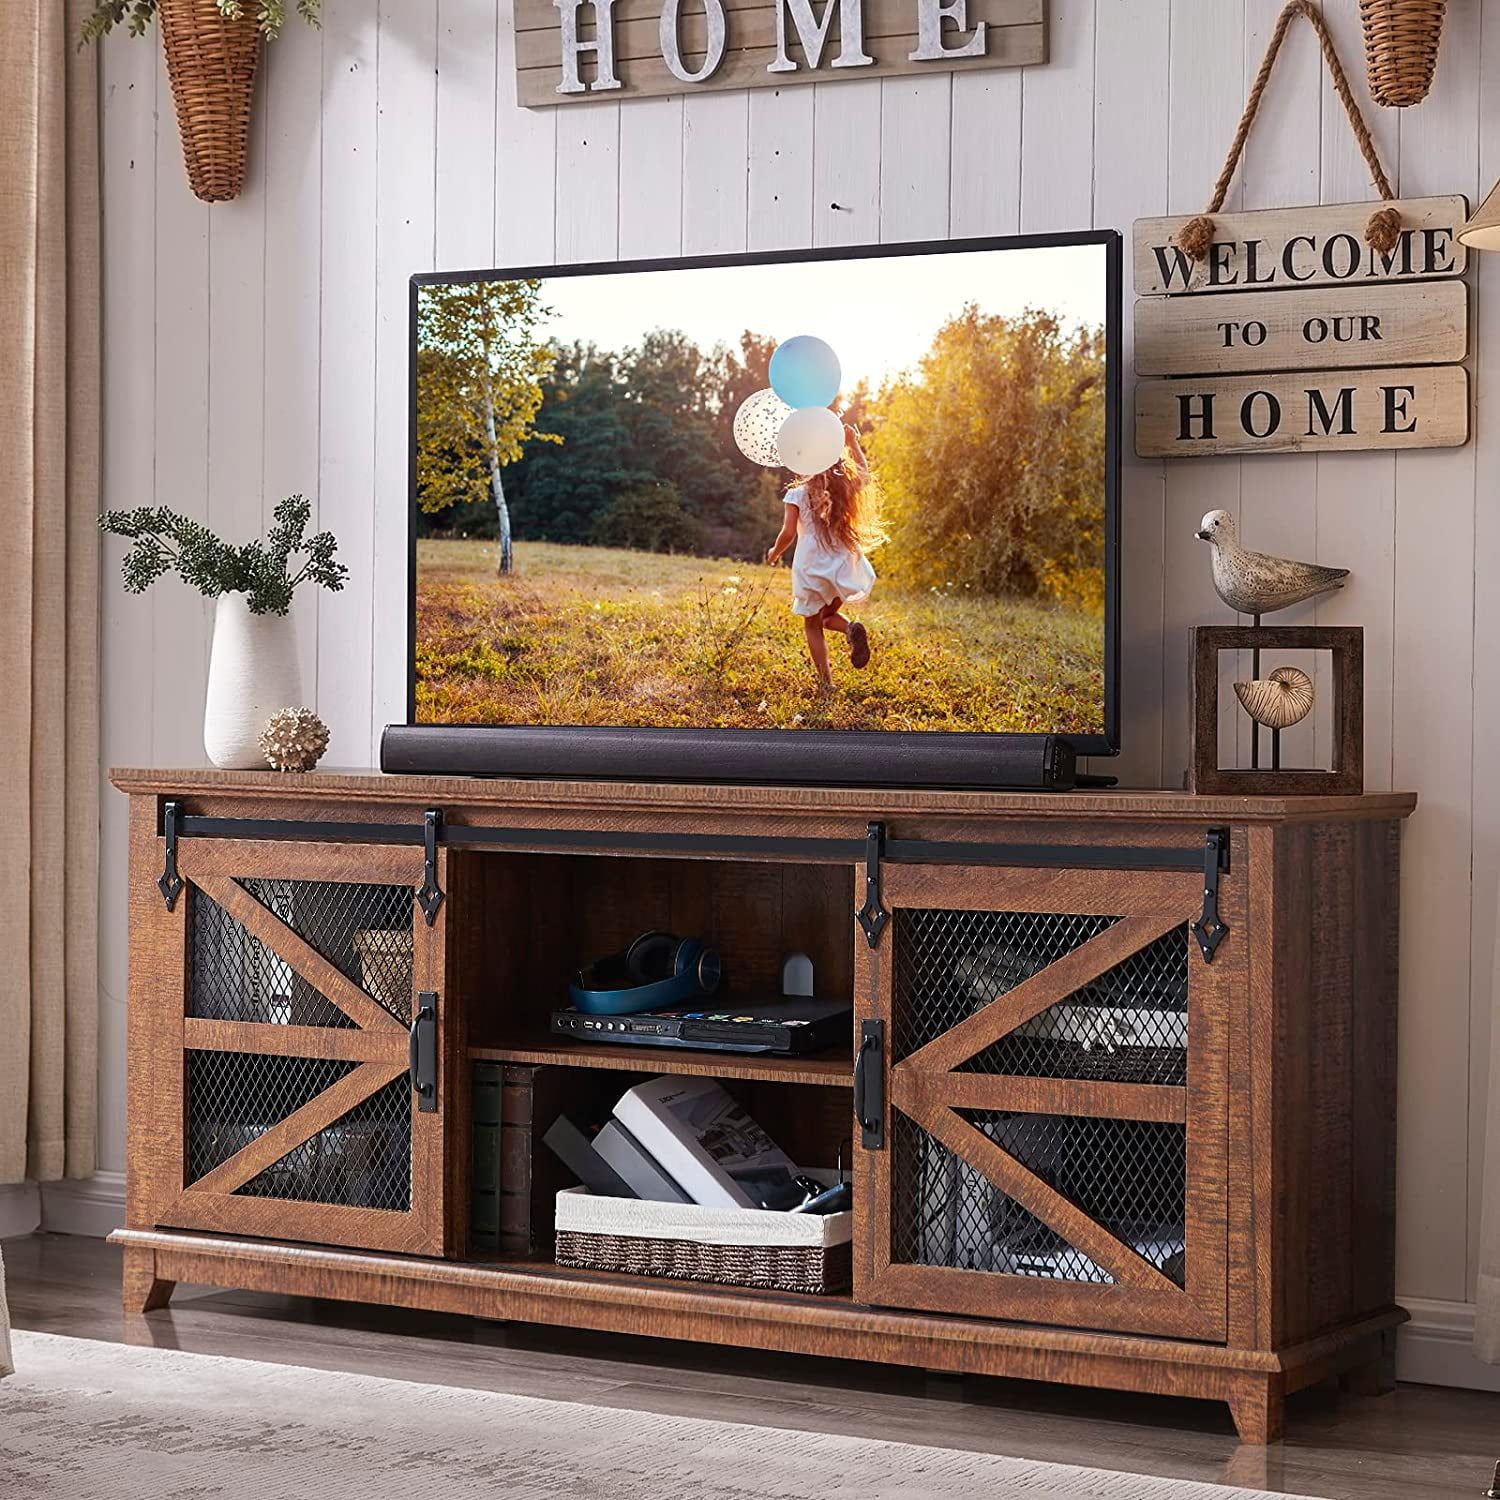 Okd Farmhouse Tv Stand For 75+ Inch Tv, Entertainment Center With  Adjustable Shelves For Living Room, Reclaimed Barnwood – Walmart Intended For Farmhouse Stands With Shelves (View 5 of 15)